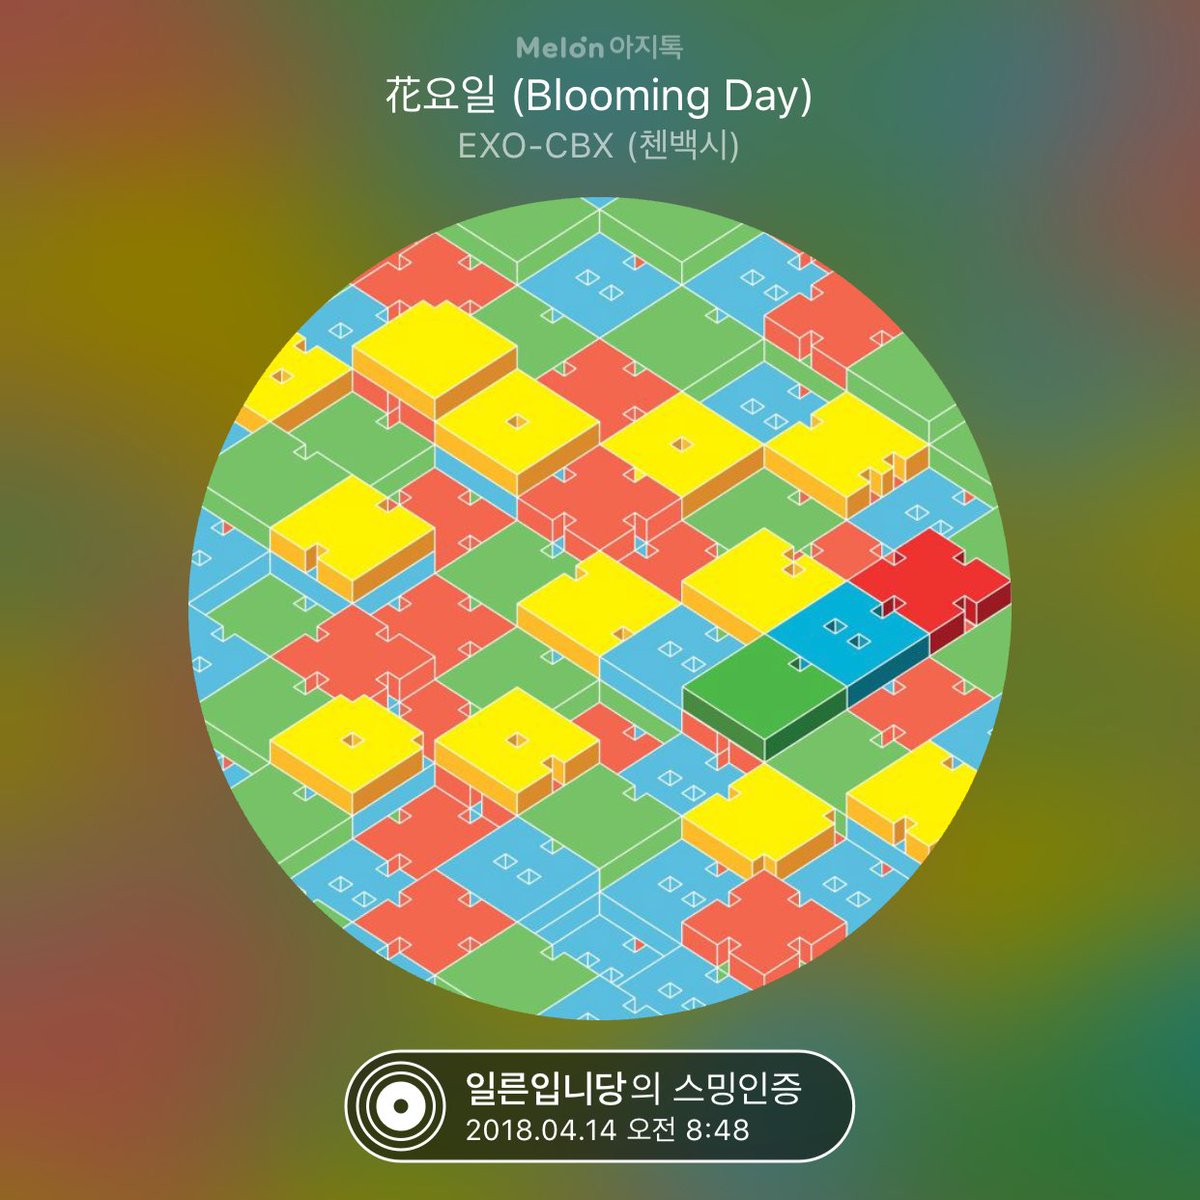 EXO-CBX 첸백시 요일 엑소 BLOOMING CHEN 뮤직뱅크 ilyn48